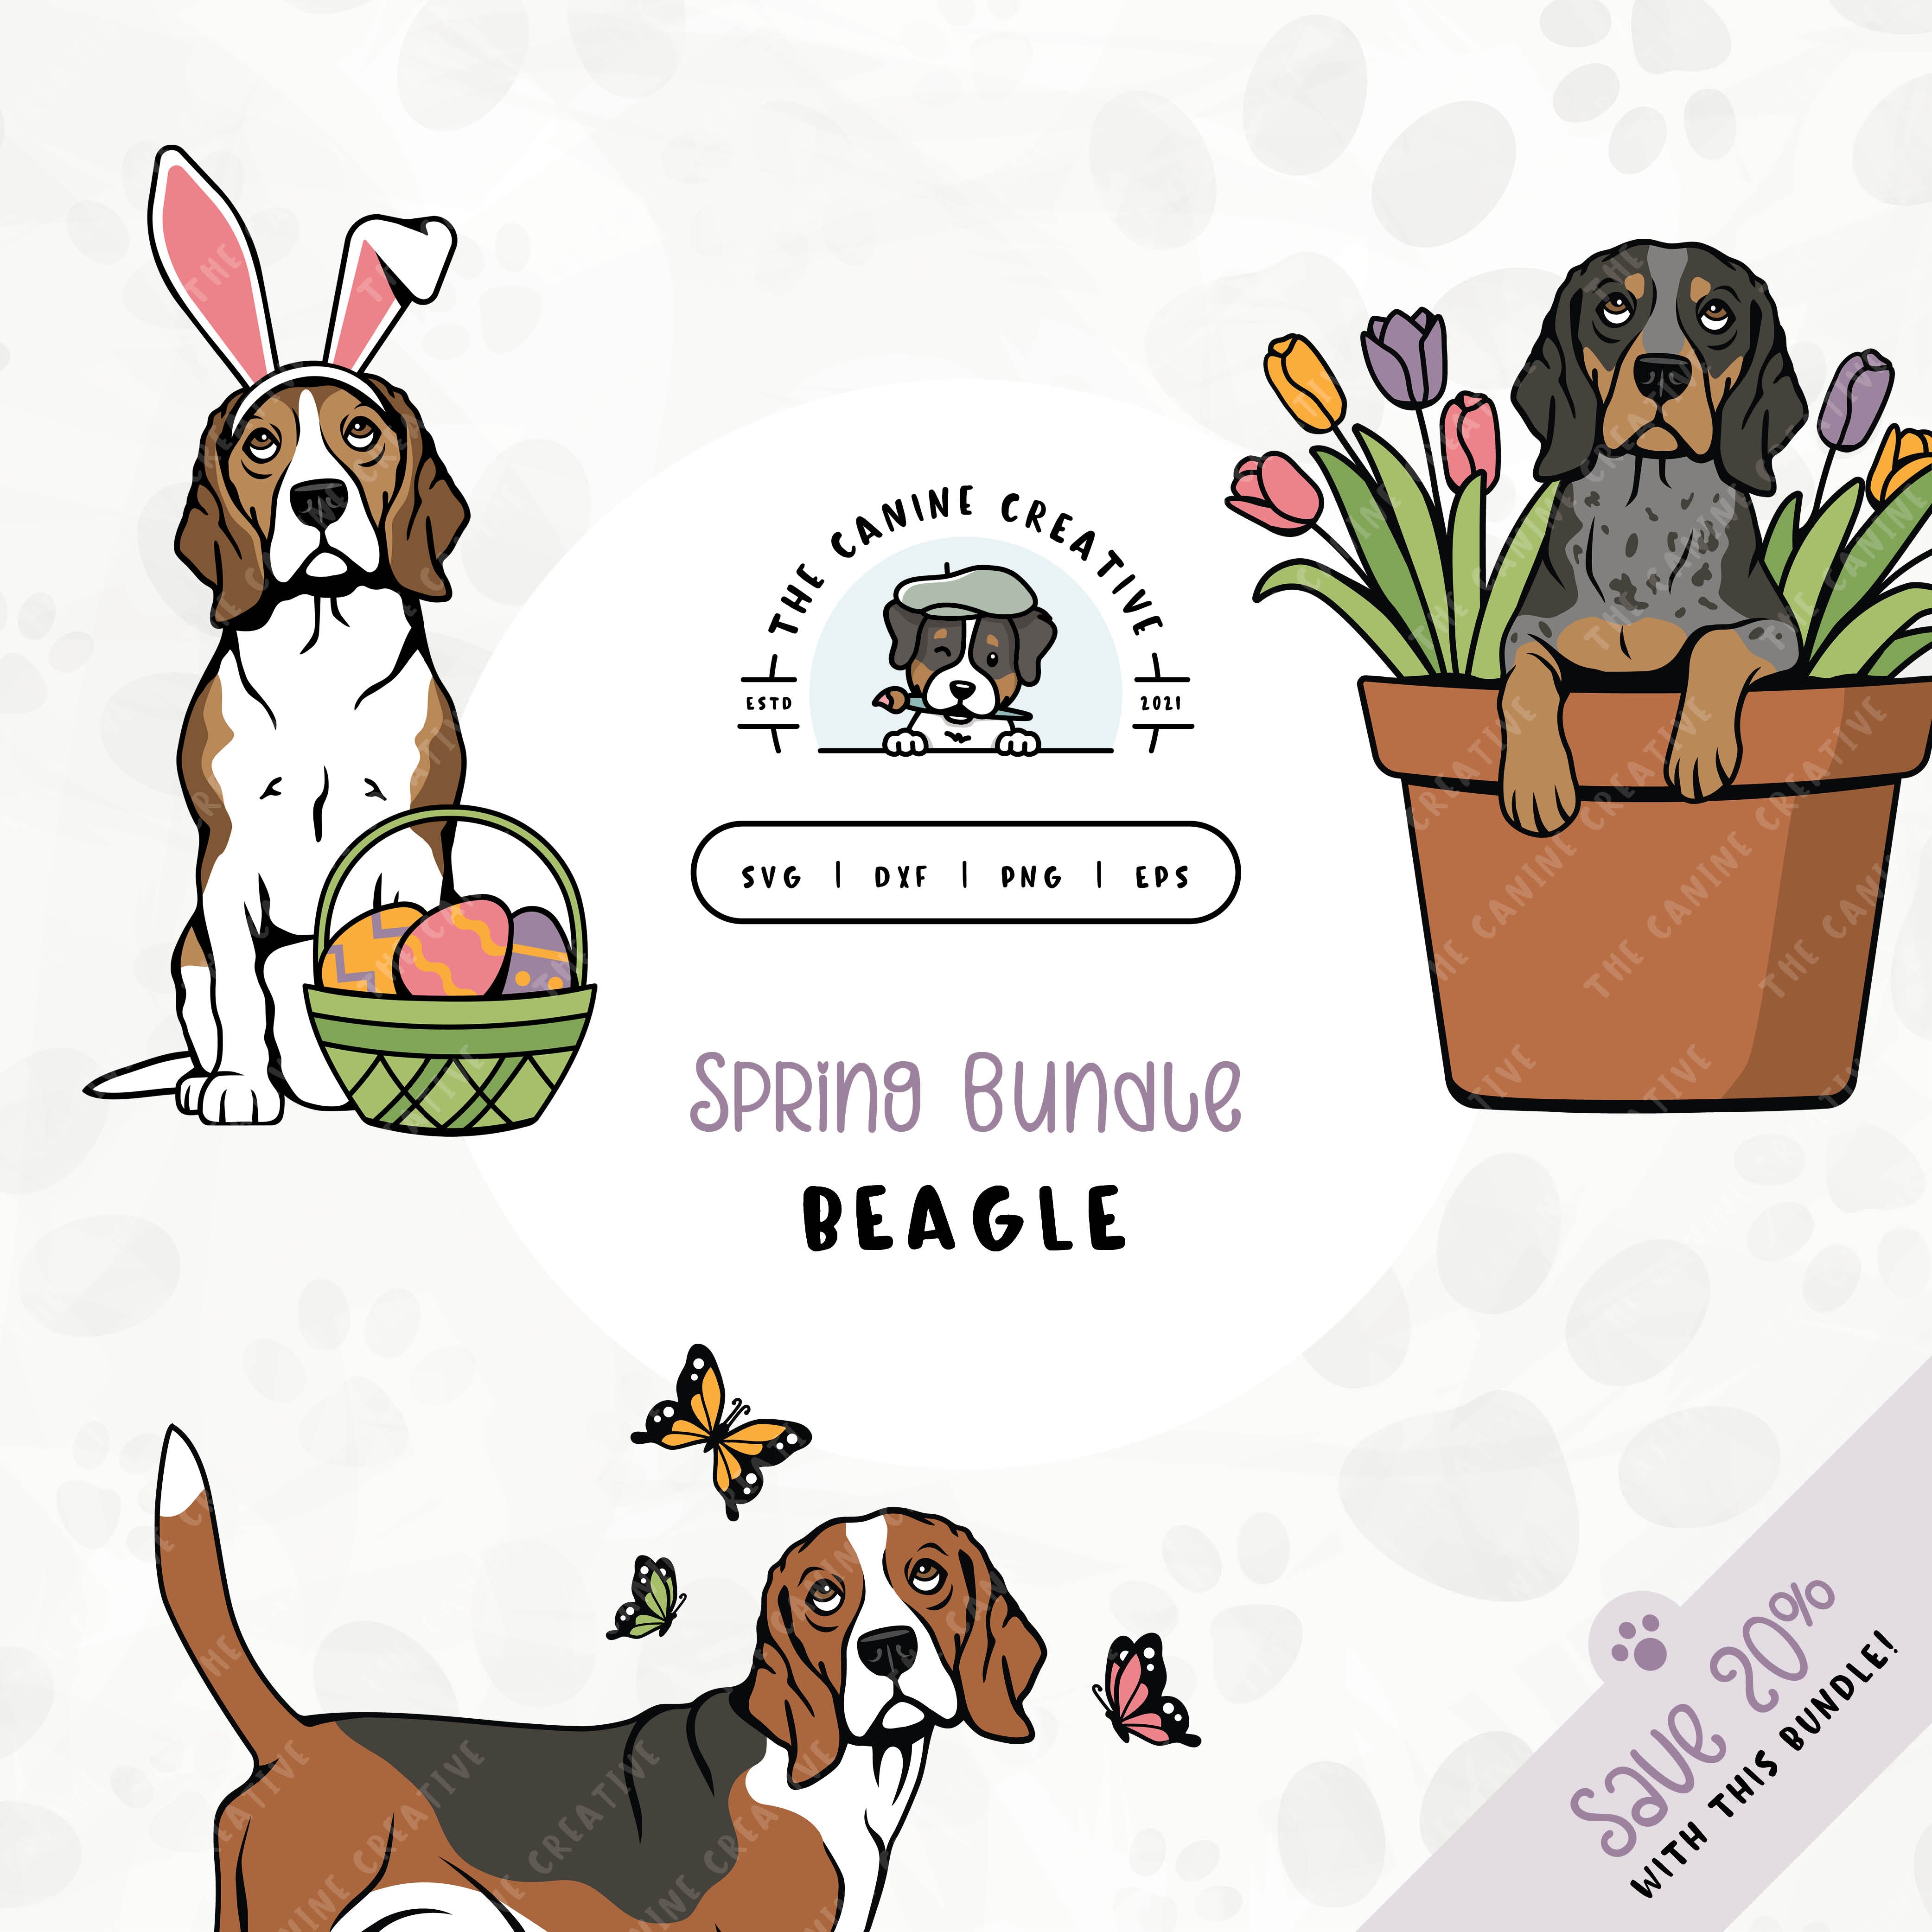 This 3-pack springtime illustration bundle features Beagles among colorful butterflies, peeking out from a pot of vibrant tulips, and wearing festive bunny ears while sitting near a basket of brightly-colored Easter eggs. File formats include: SVG, DXF, PNG, and EPS.